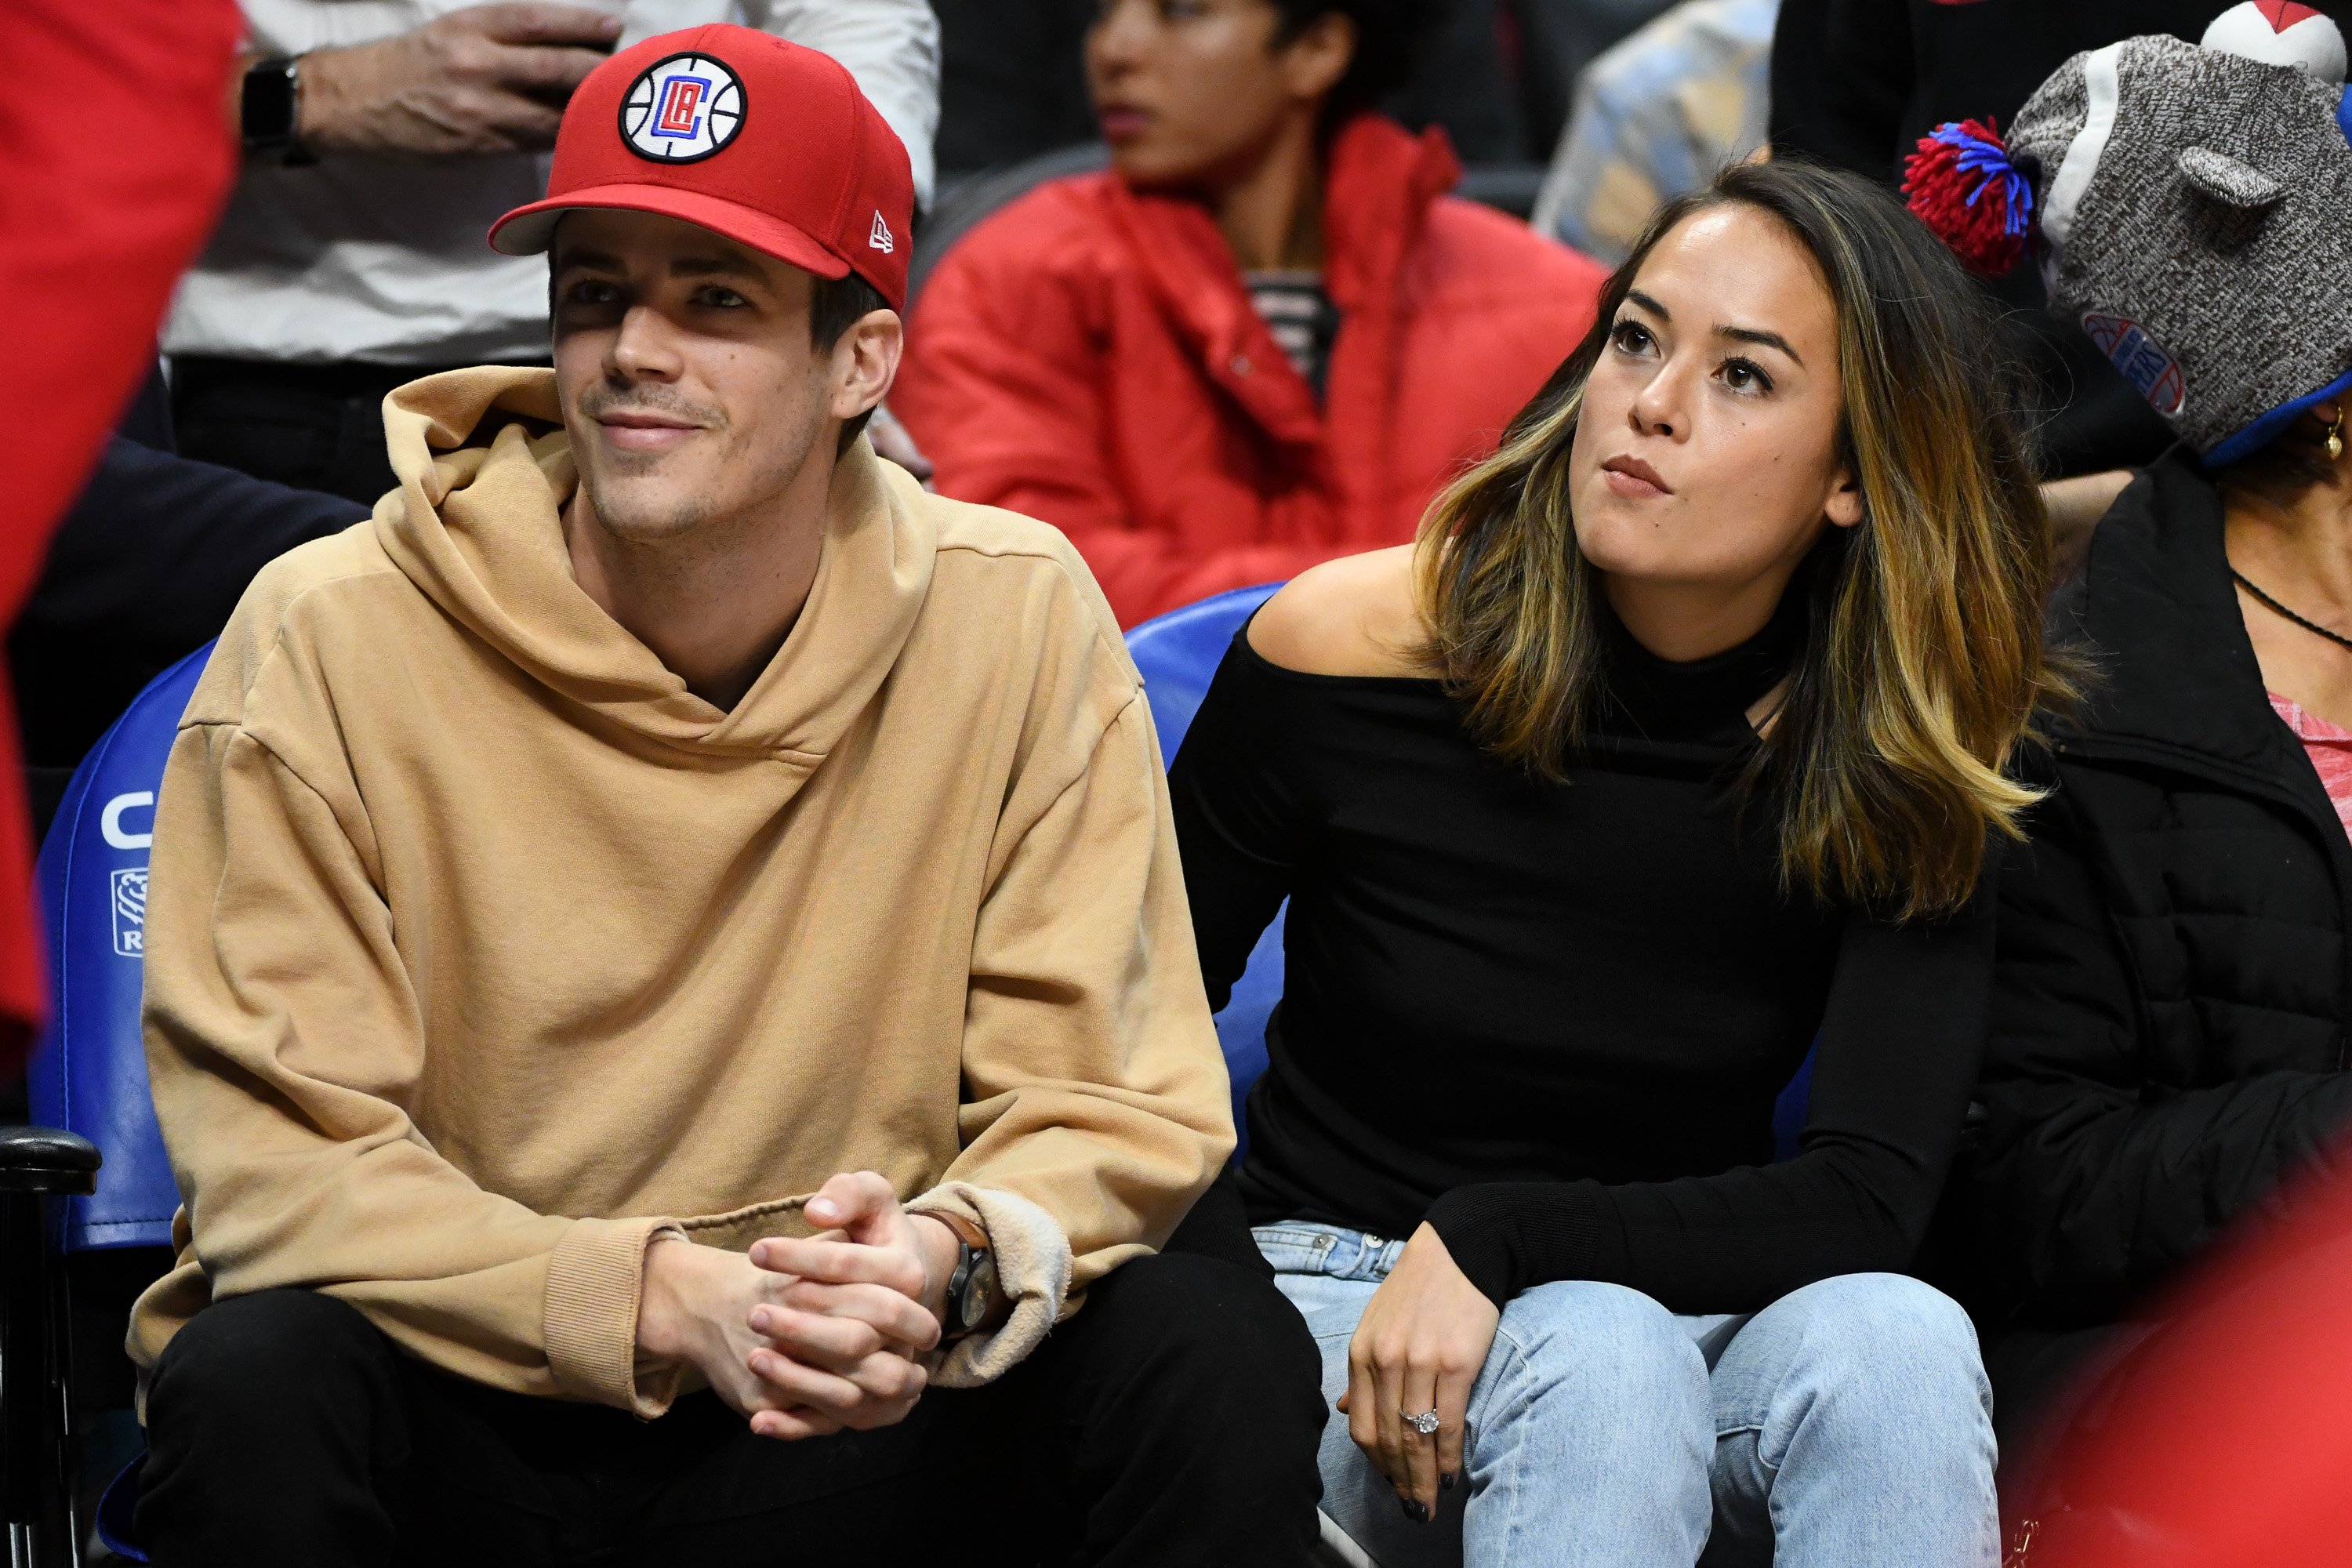 Grant Gustin and Andrea "LA" Thoma attend a basketball game between the Los Angeles Clippers and the Minnesota Timberwolves in Los Angeles | Source: Getty Images